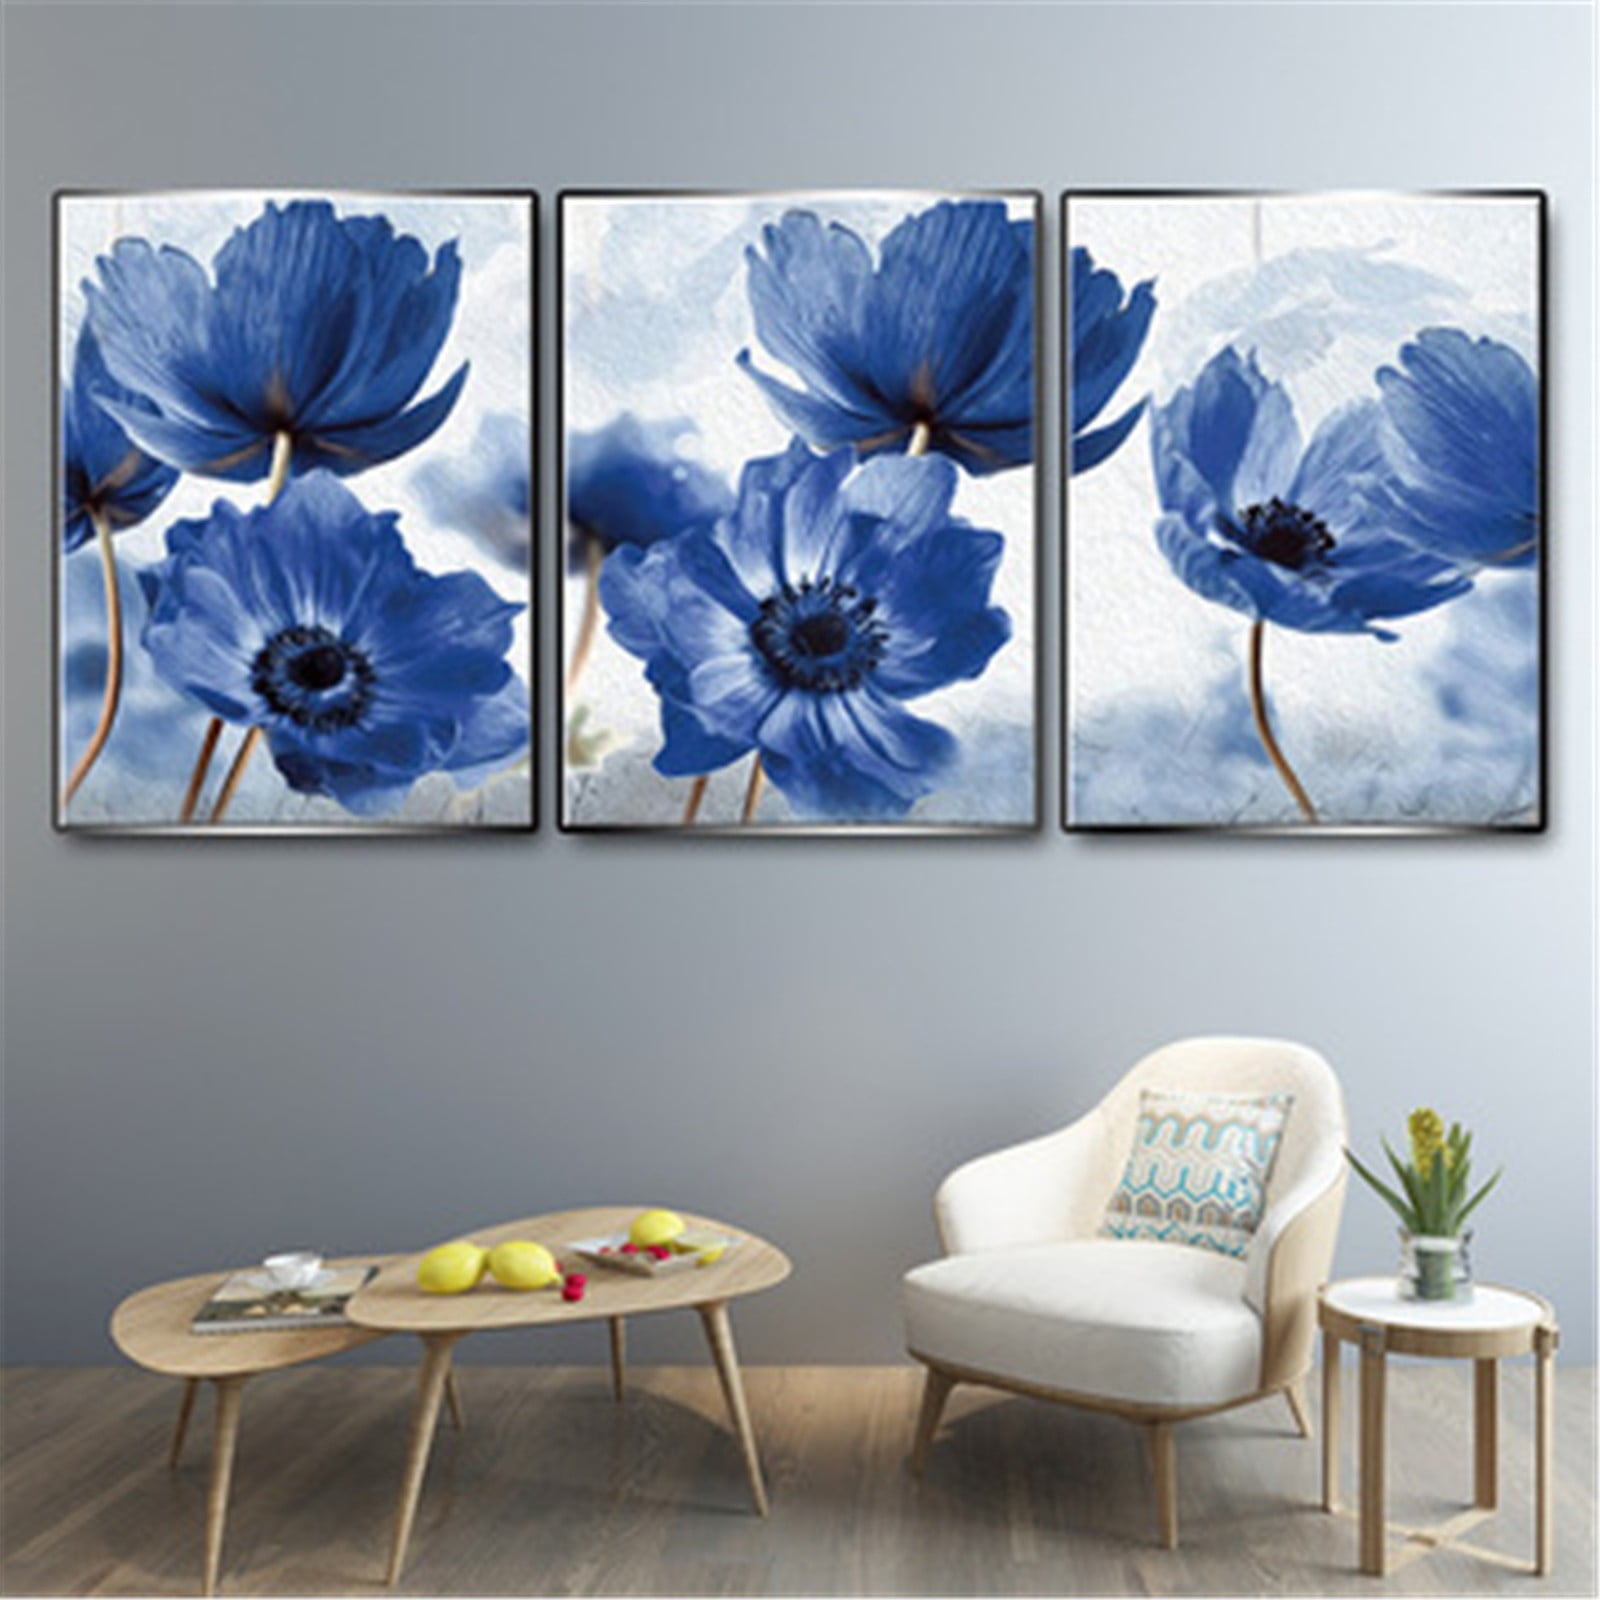 Blue Coffee and Flowers Poster Printable Modern Office Wall Art Decor